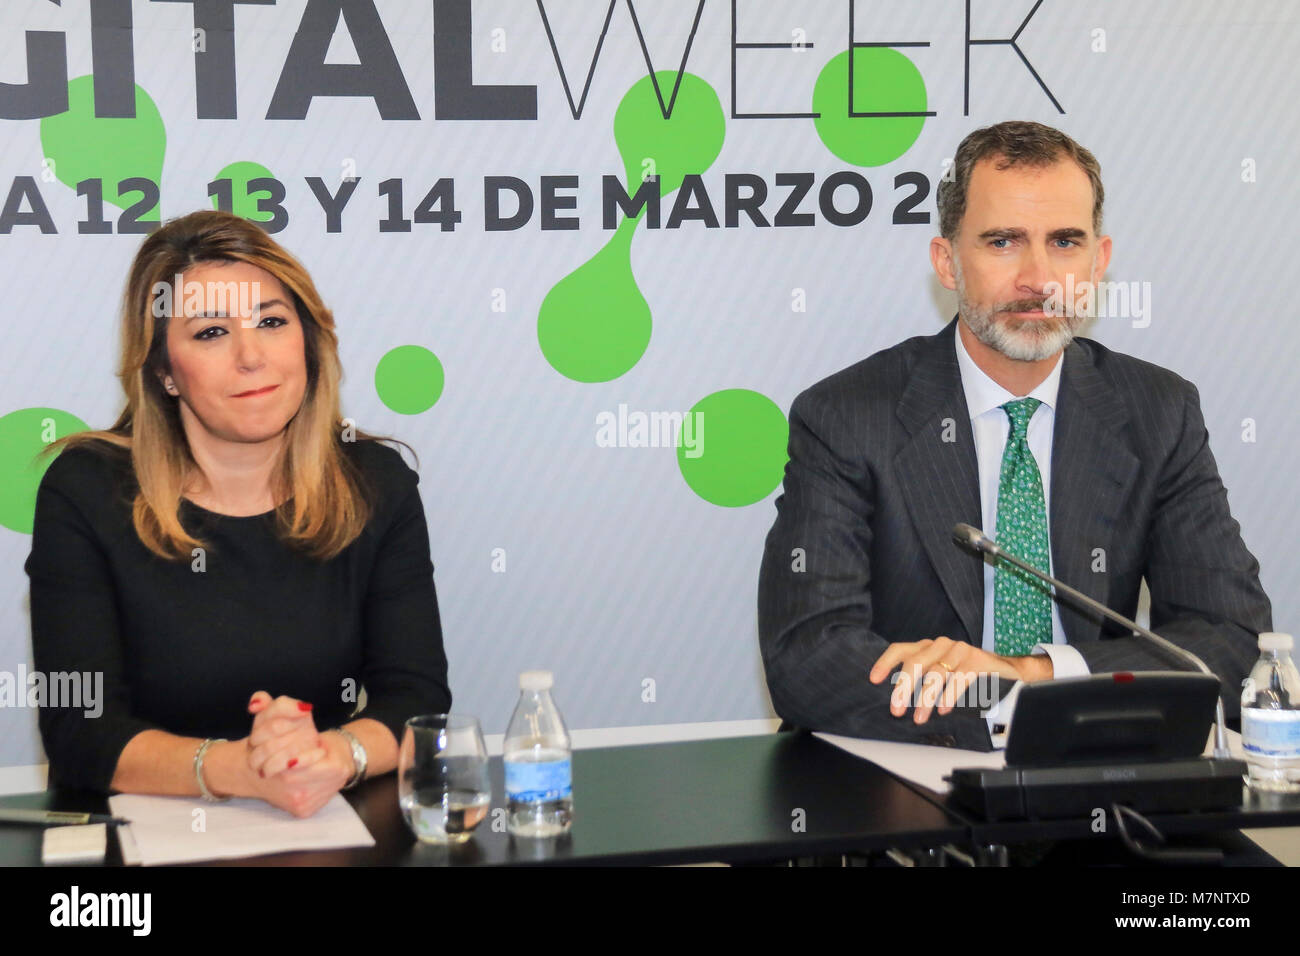 Seville, Spain. 12th Mar, 2018. Spanish King Felipe VI and politician Susana Diaz during the inauguration of the 1 edition of “ Andalucia Digital Week “ in Sevilla on Monday 12, March 2018 Credit: Gtres Información más Comuniación on line, S.L./Alamy Live News Stock Photo